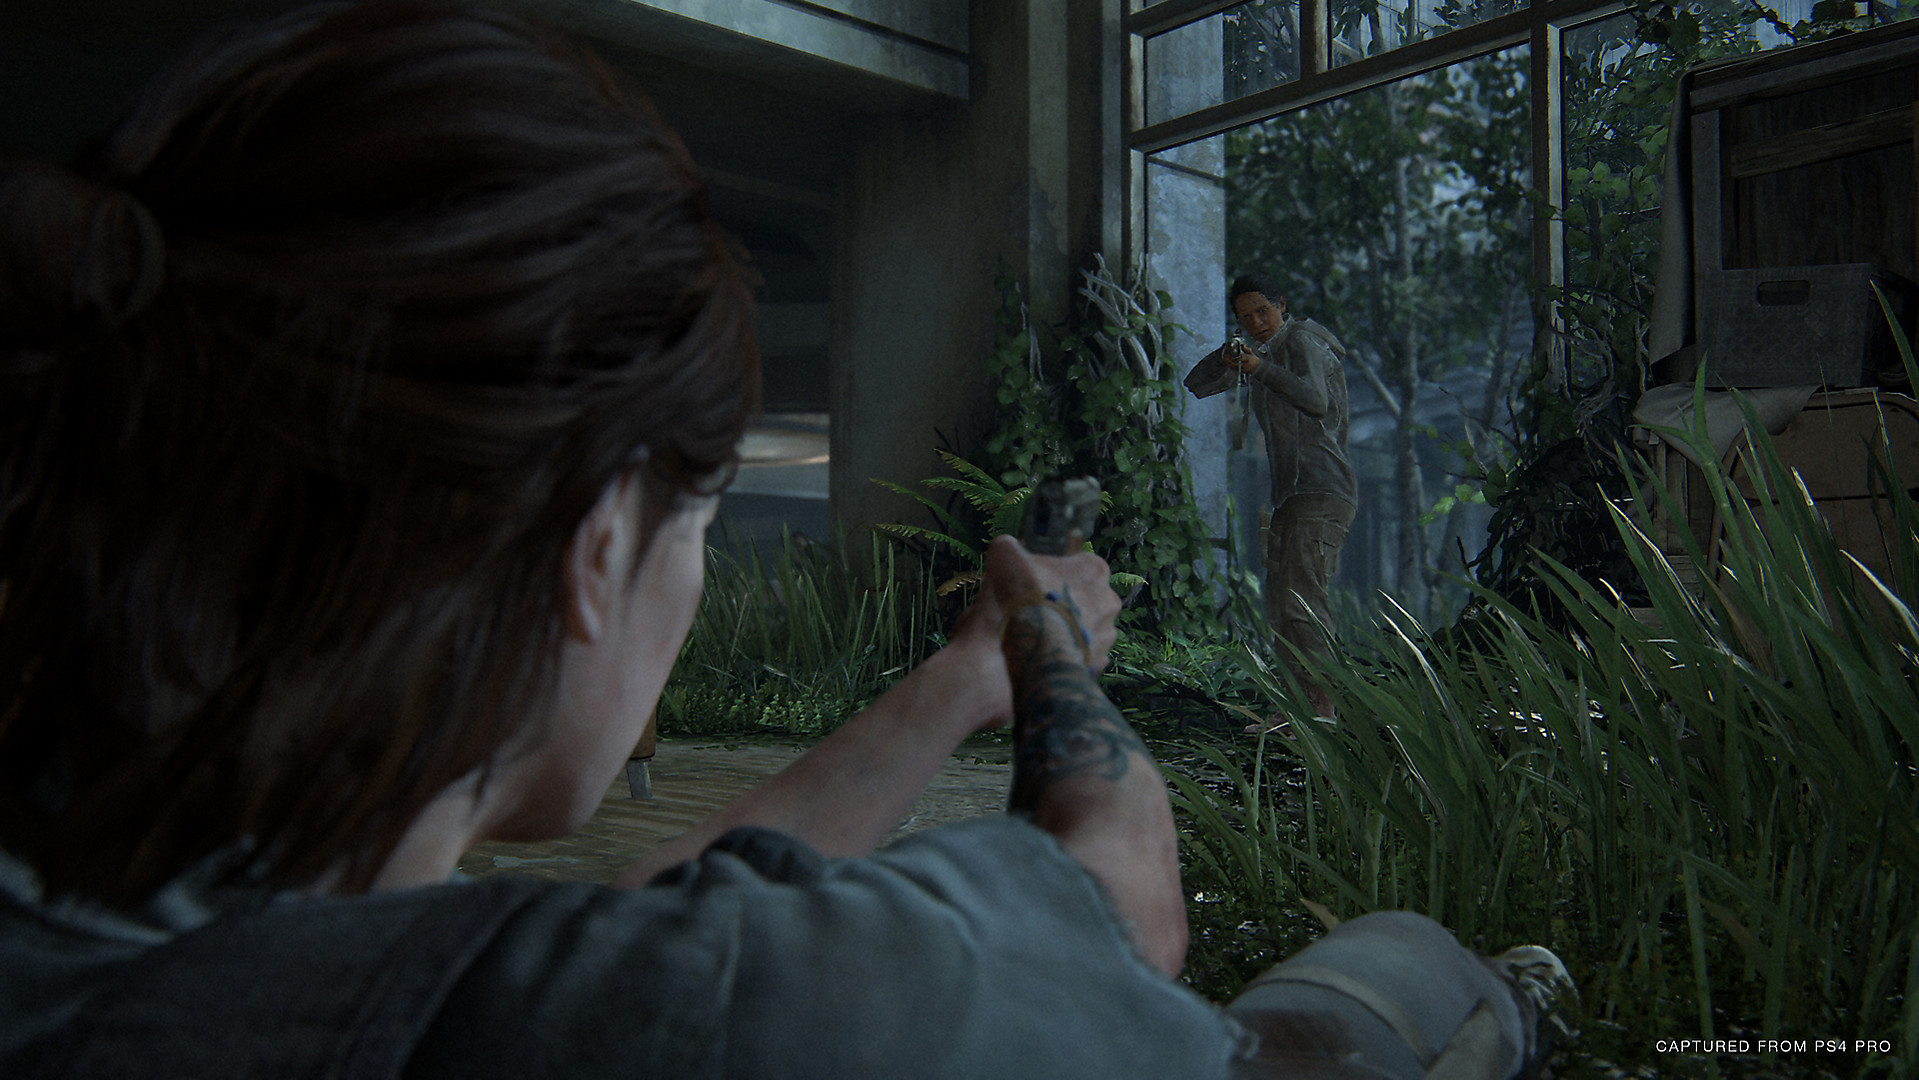 3685291 tlou6 | The Last of Us | The Last of Us Multiplayer อาจเปิดให้เล่นแบบ Free-to-Play